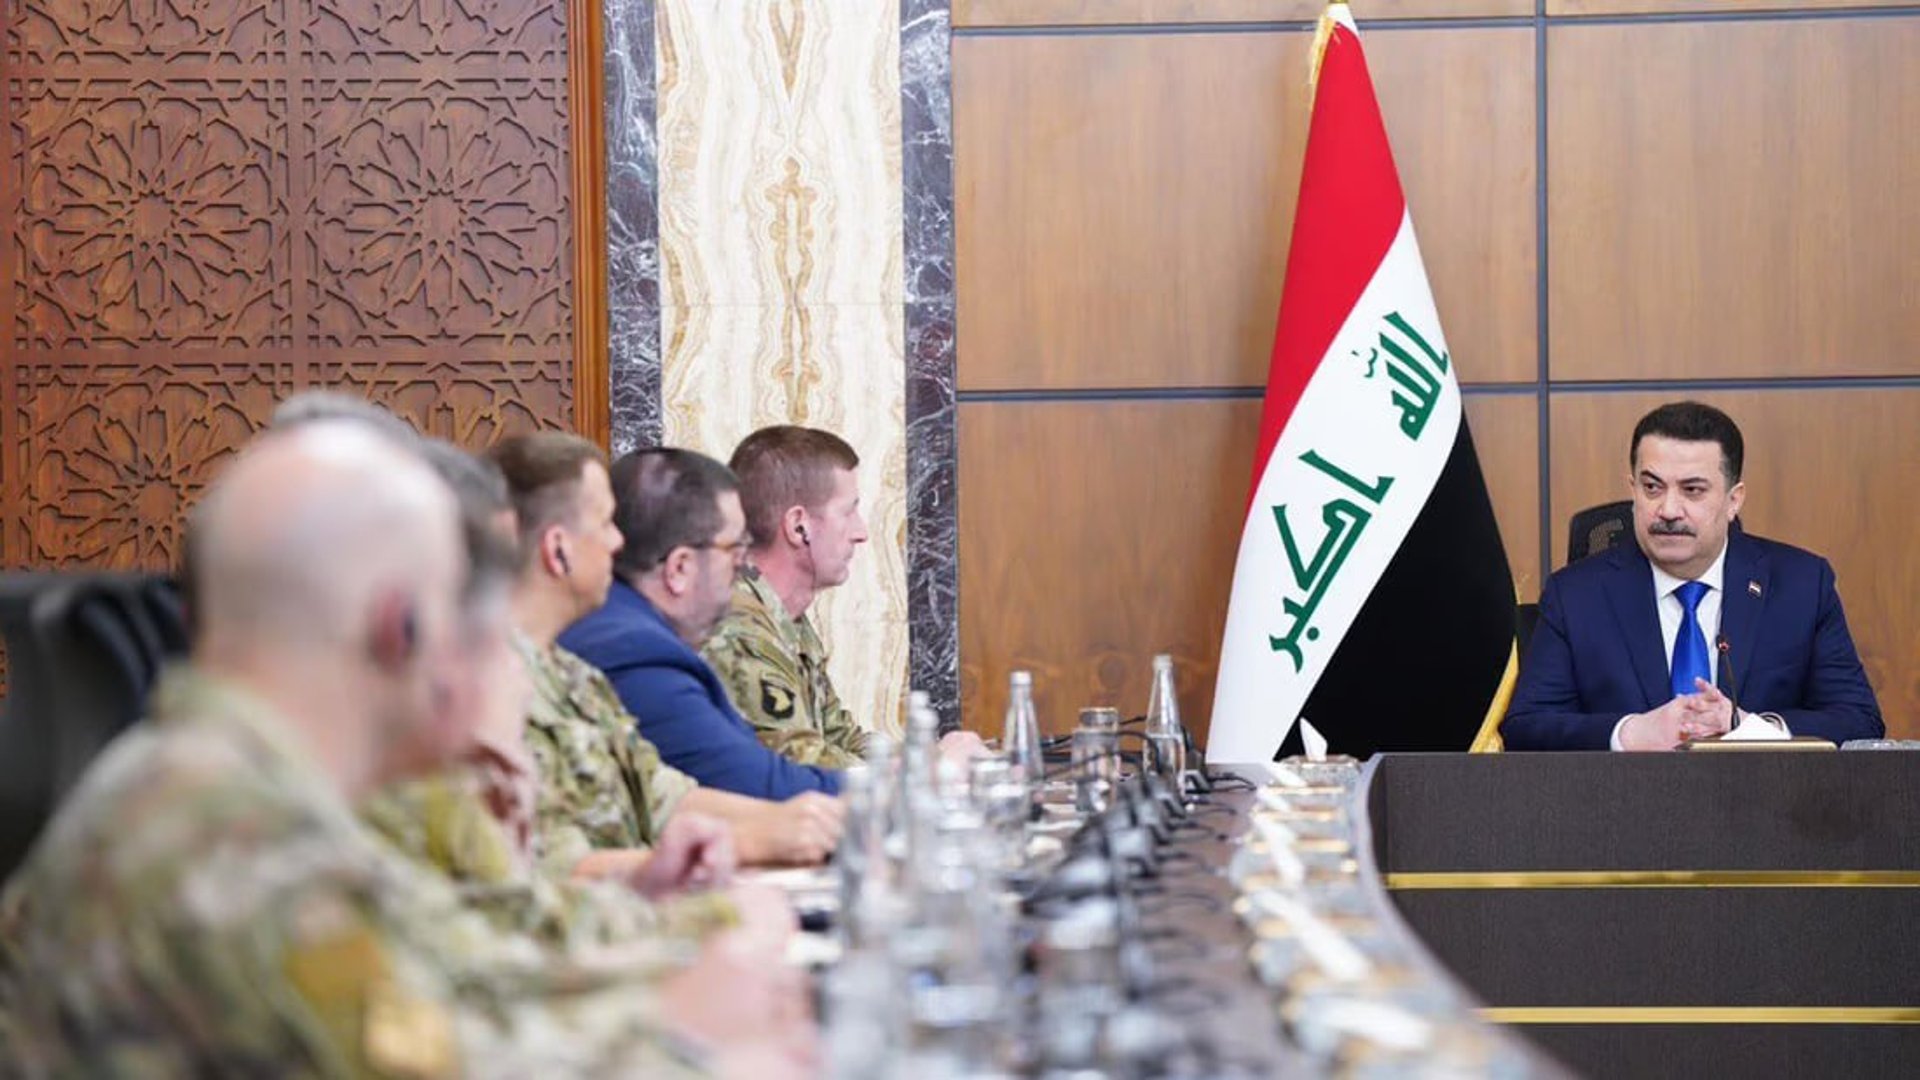 AlSudani chairs joint talks on ending coalition mission